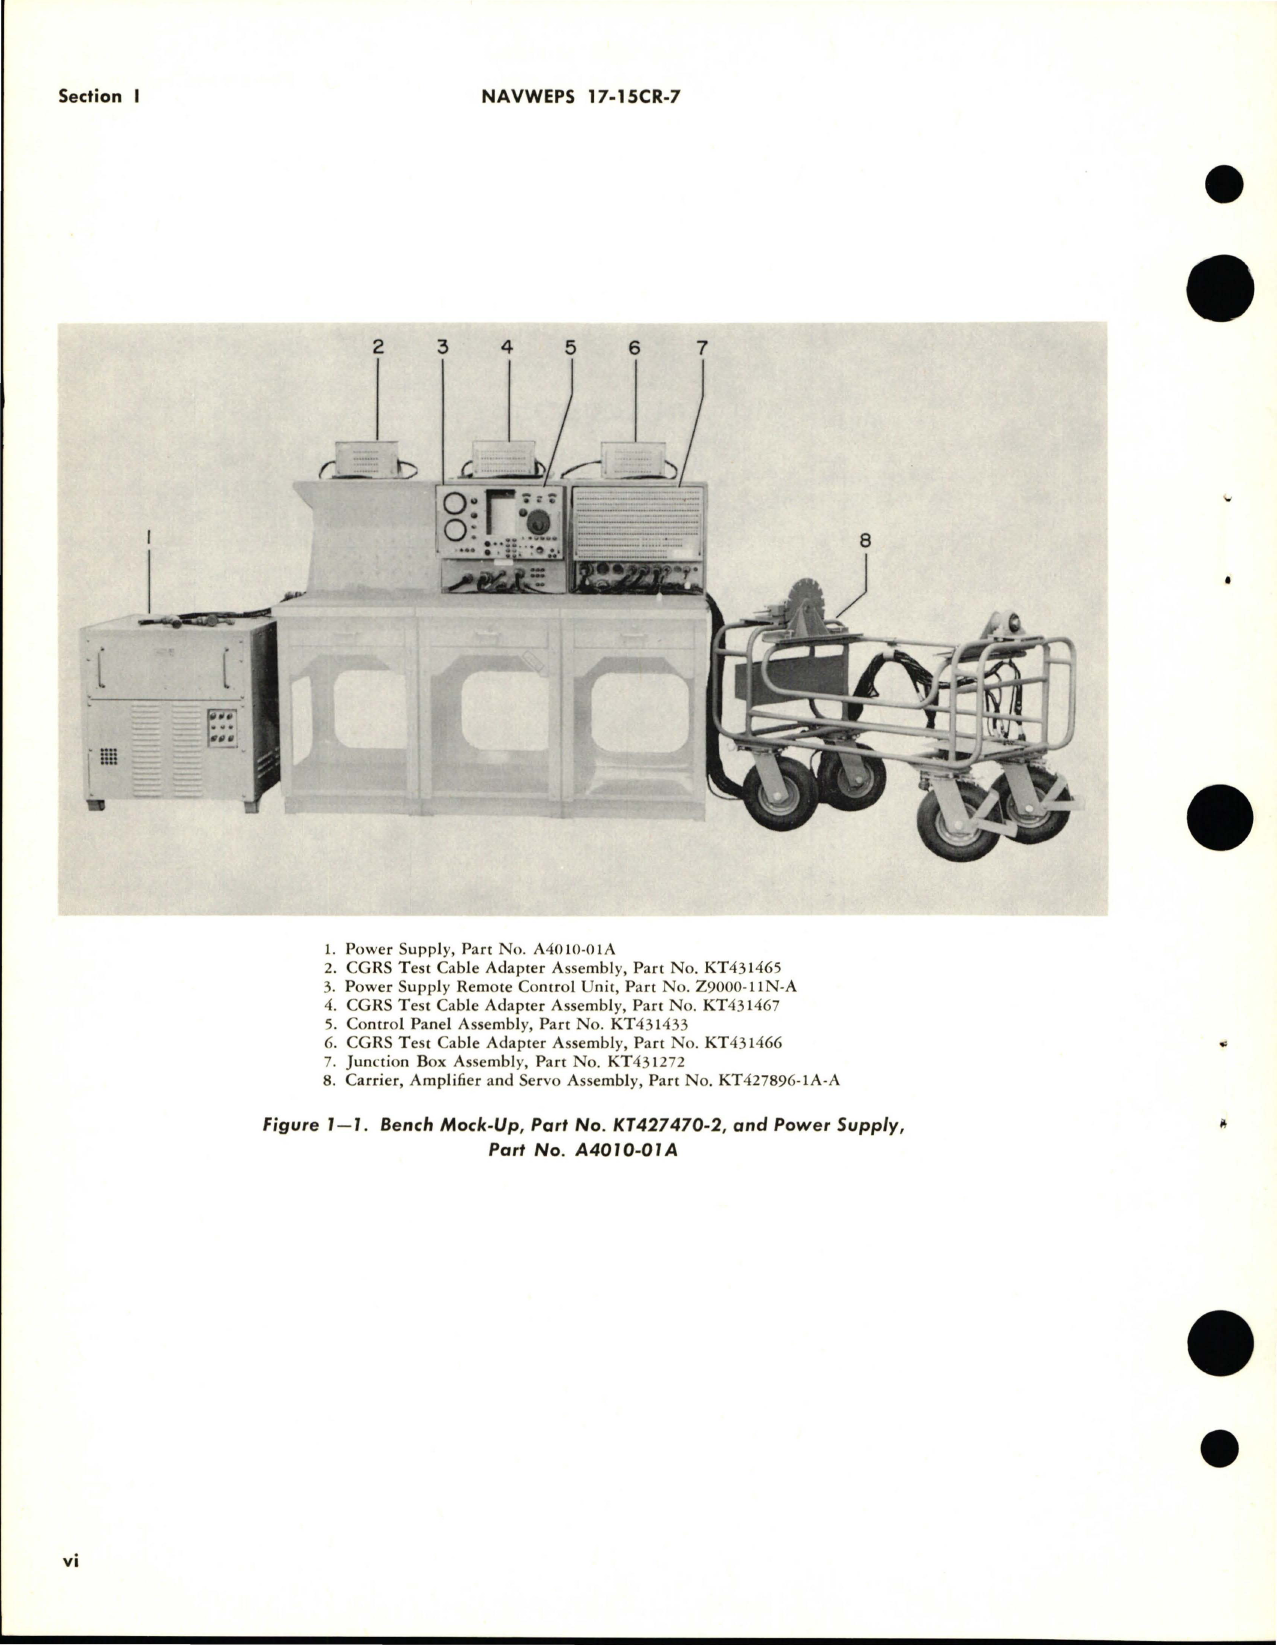 Sample page 8 from AirCorps Library document: Operation, Service Instructions with Illustrated Parts Breakdown for Bench Mock-Up - Part KT427470-2 and Power Supply - Part A4010-01A